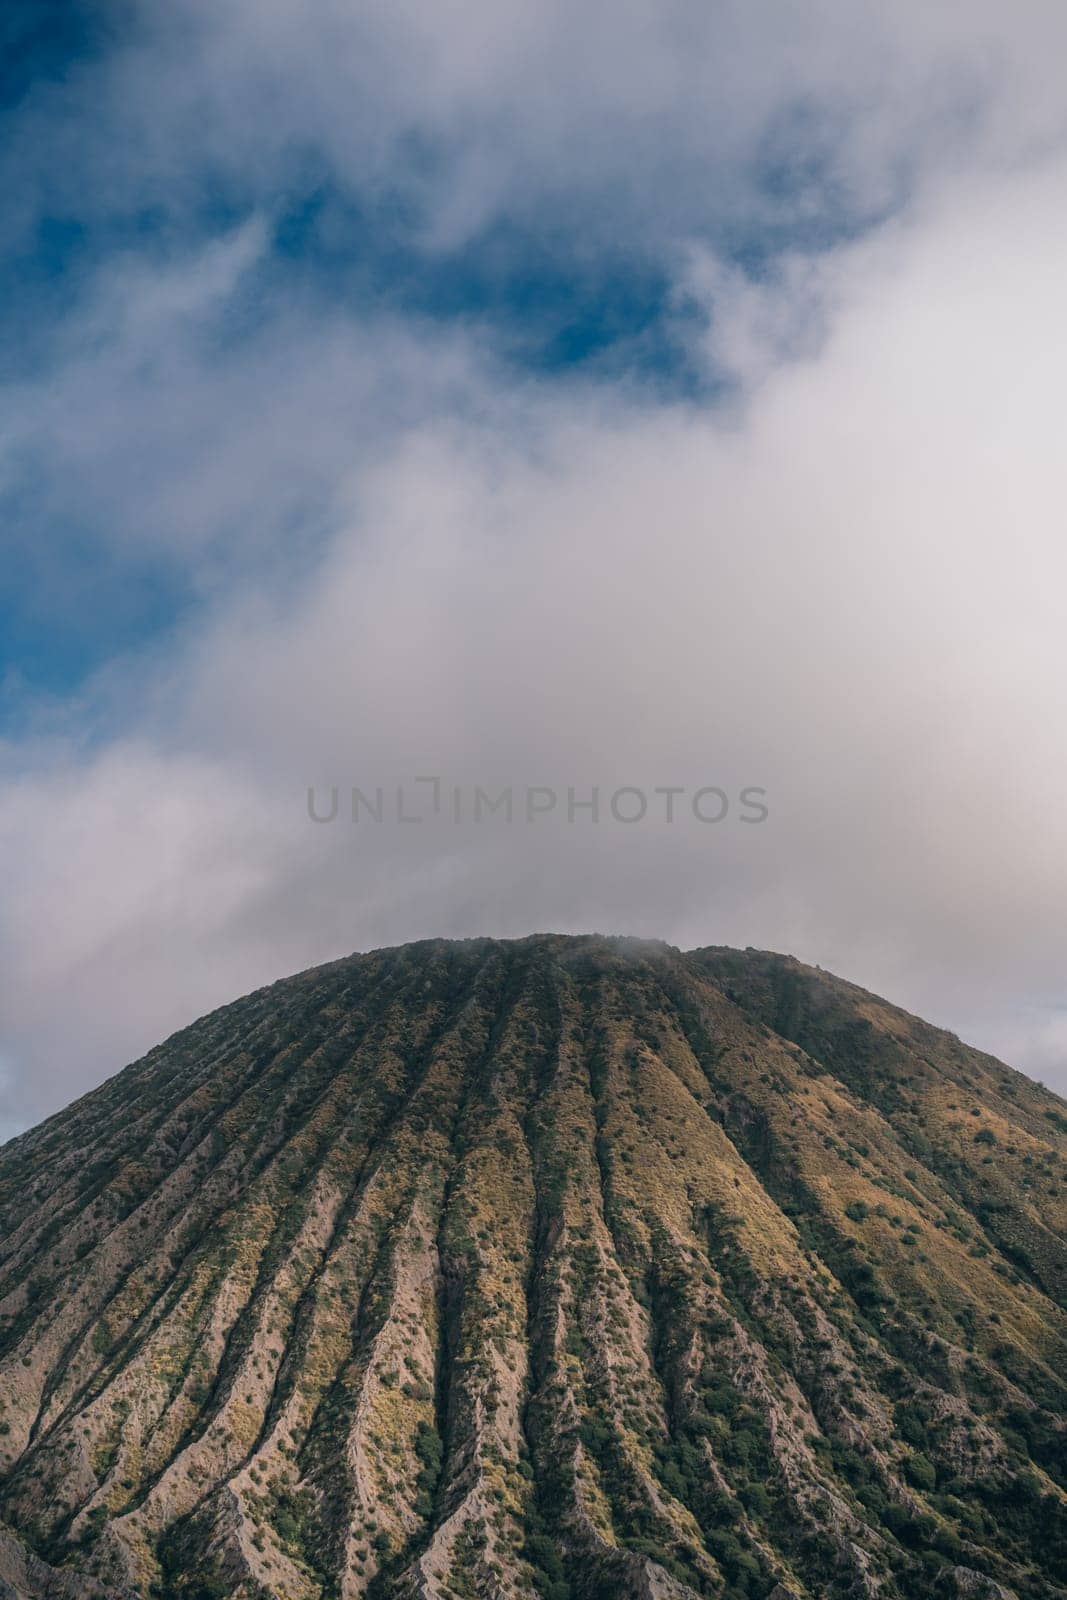 Side view of Bromo mount volcano. Landscape view of mountain vegetation in Semeru National Park